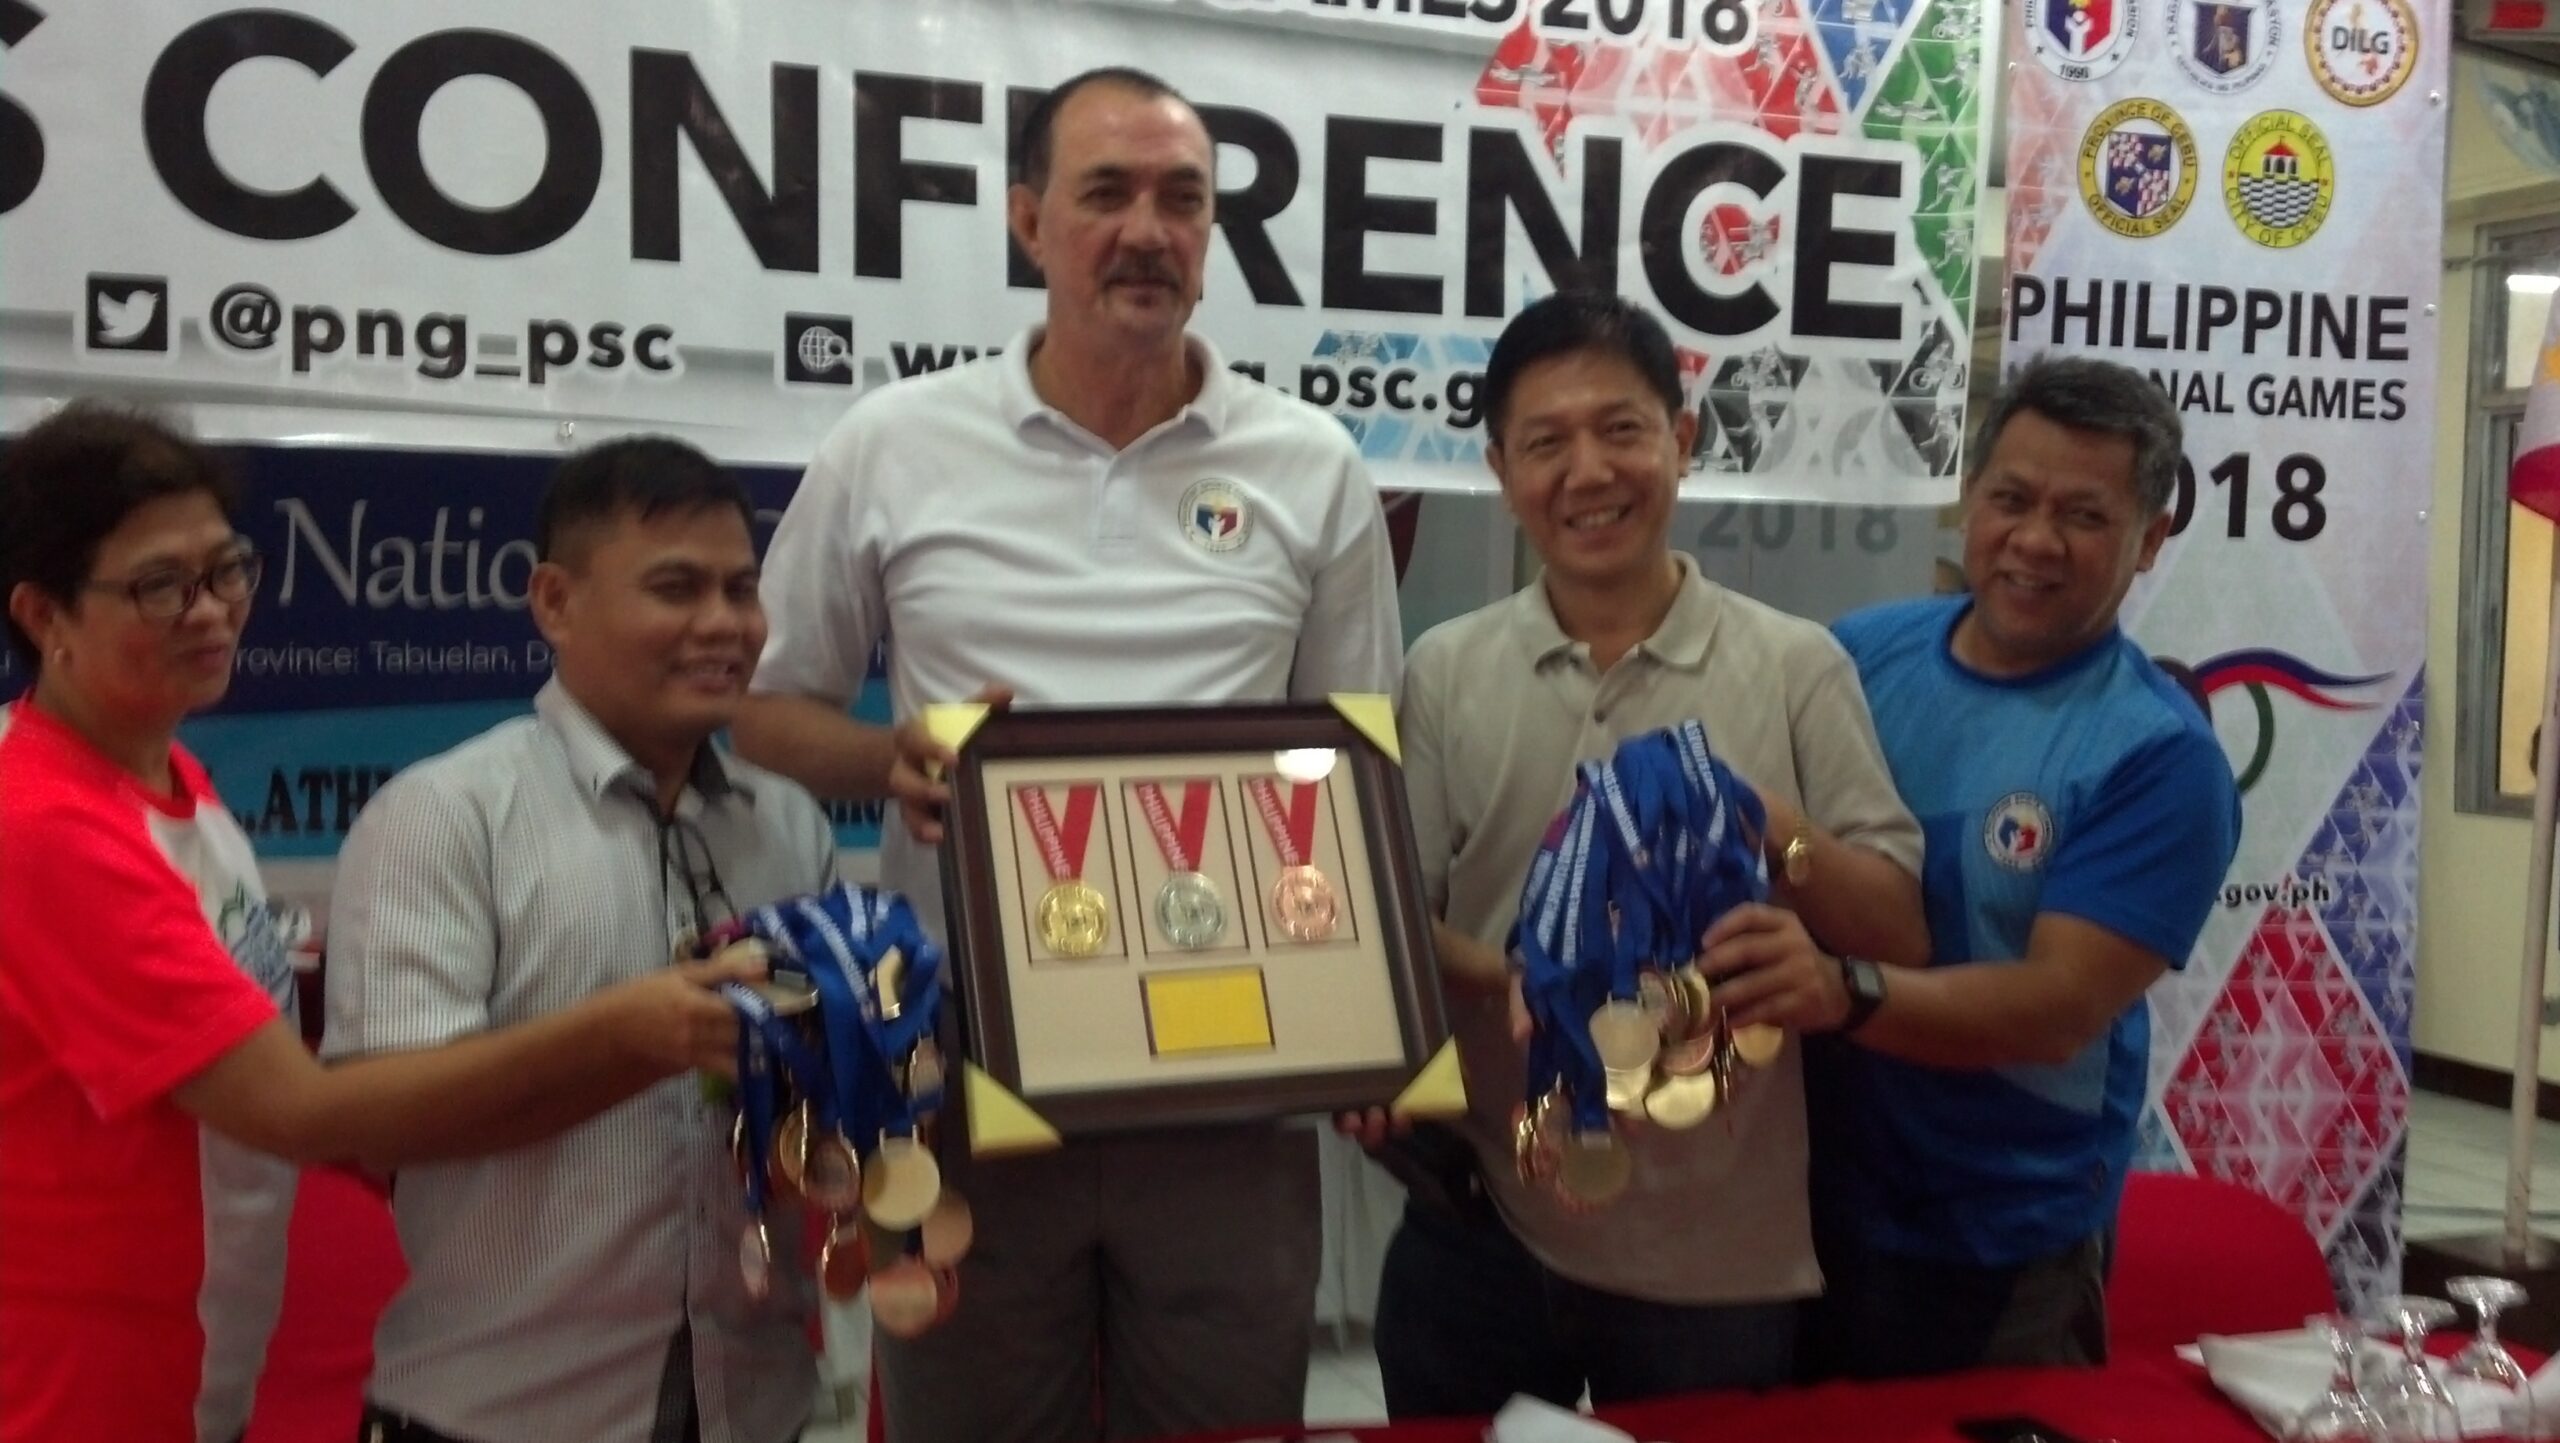 P15 million prize up for grabs in Philippine National Games 2018